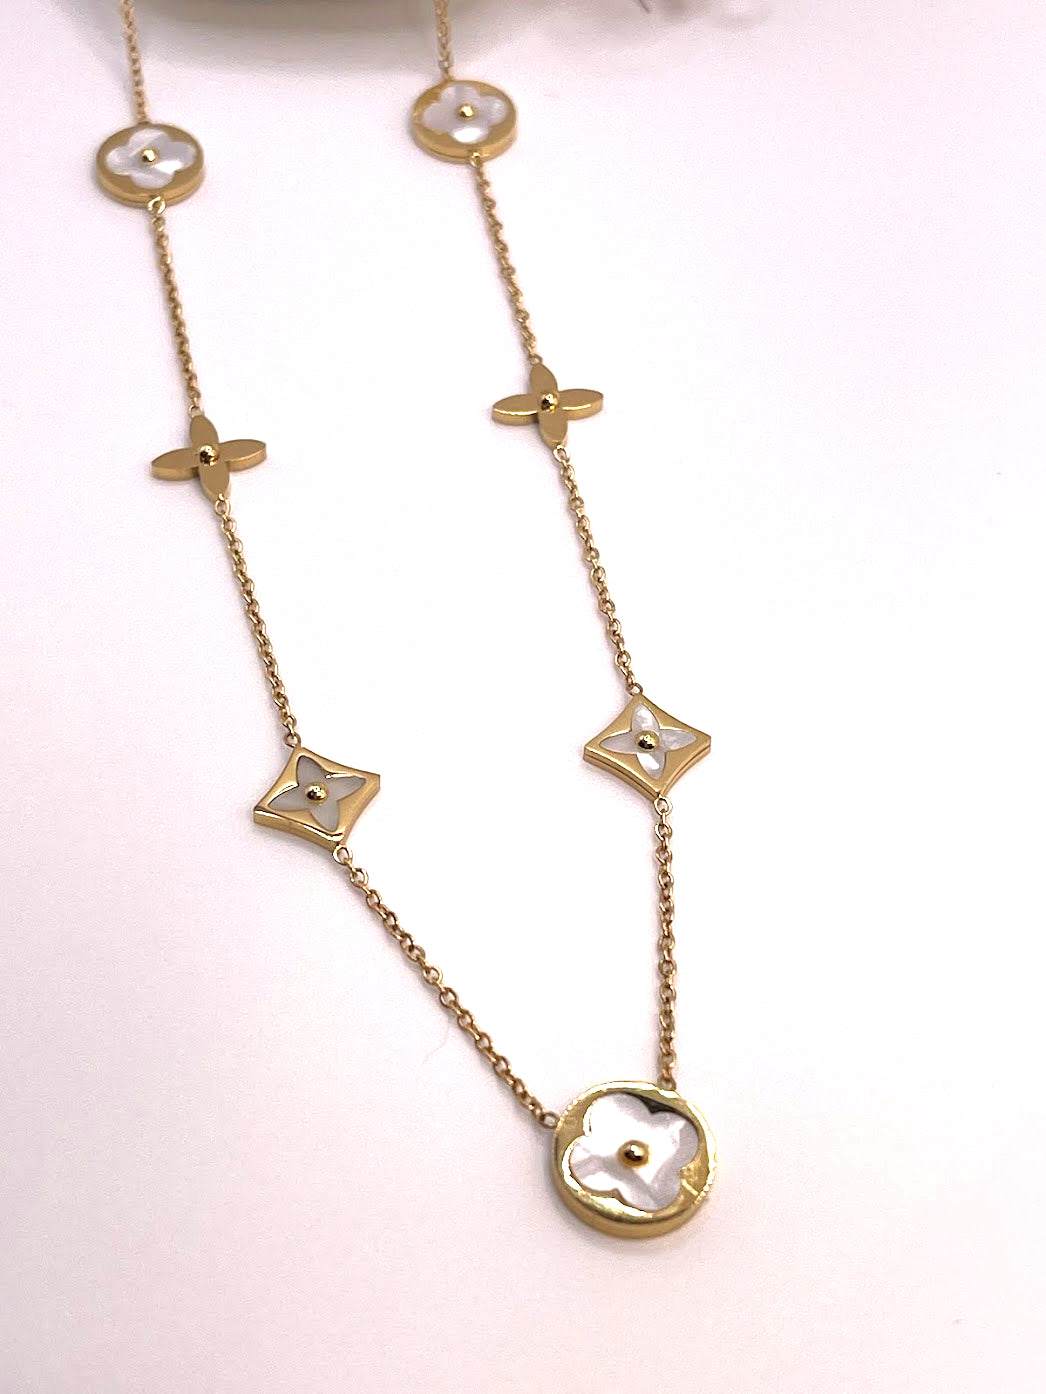 Louis Vuitton Petit Louis Necklace | Rent Louis Vuitton jewelry for  $55/month - Join Switch